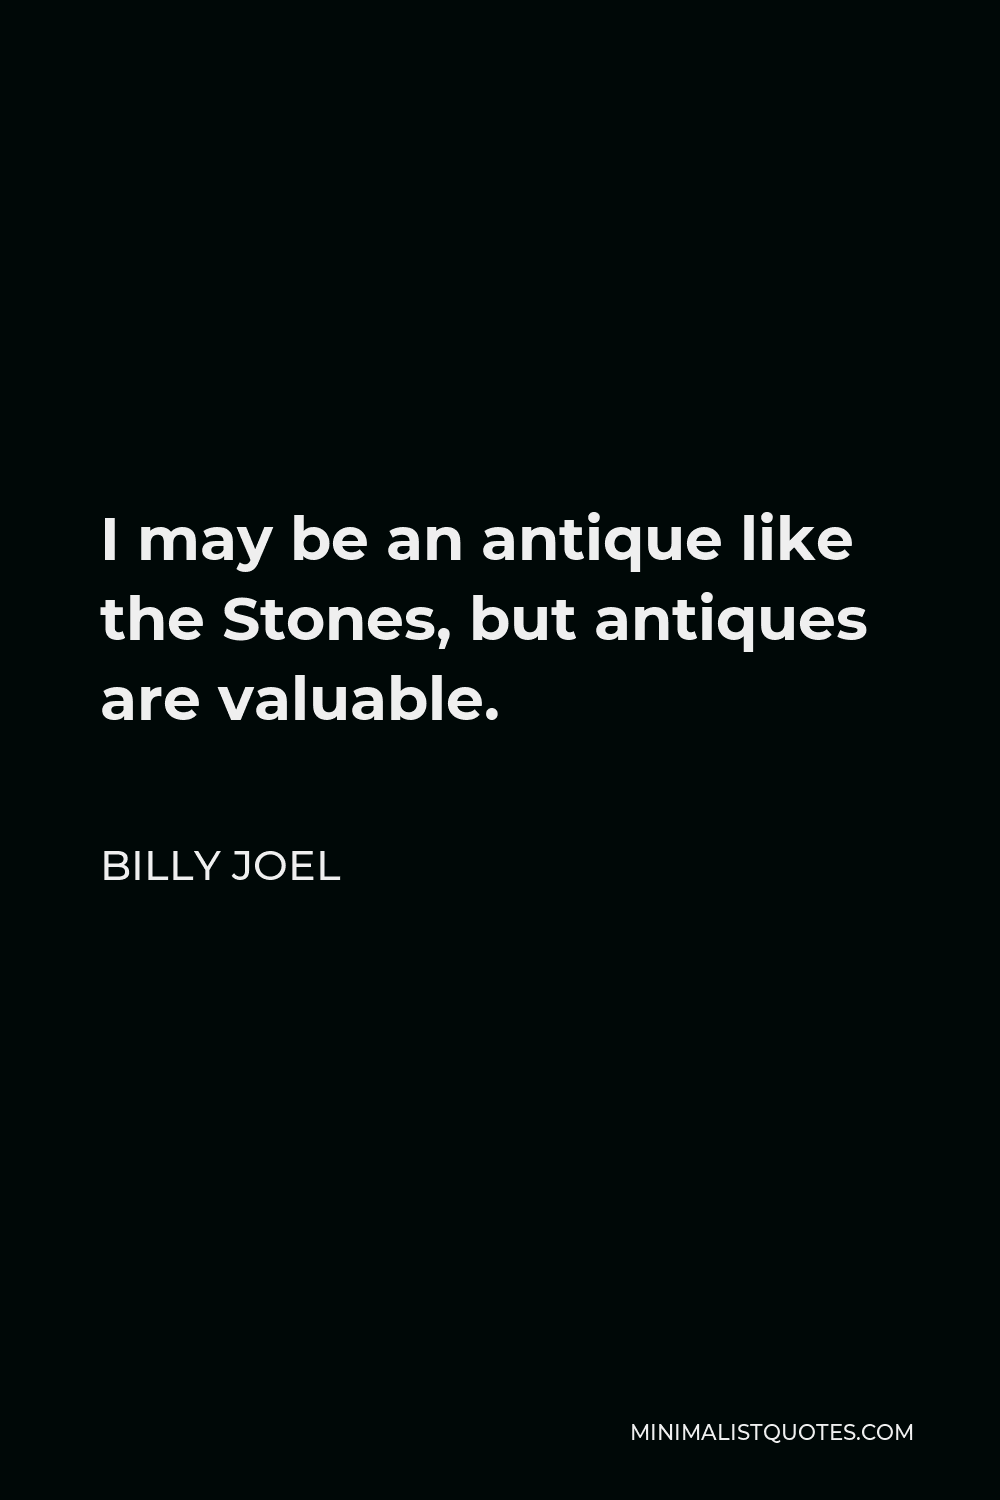 Billy Joel Quote - I may be an antique like the Stones, but antiques are valuable.